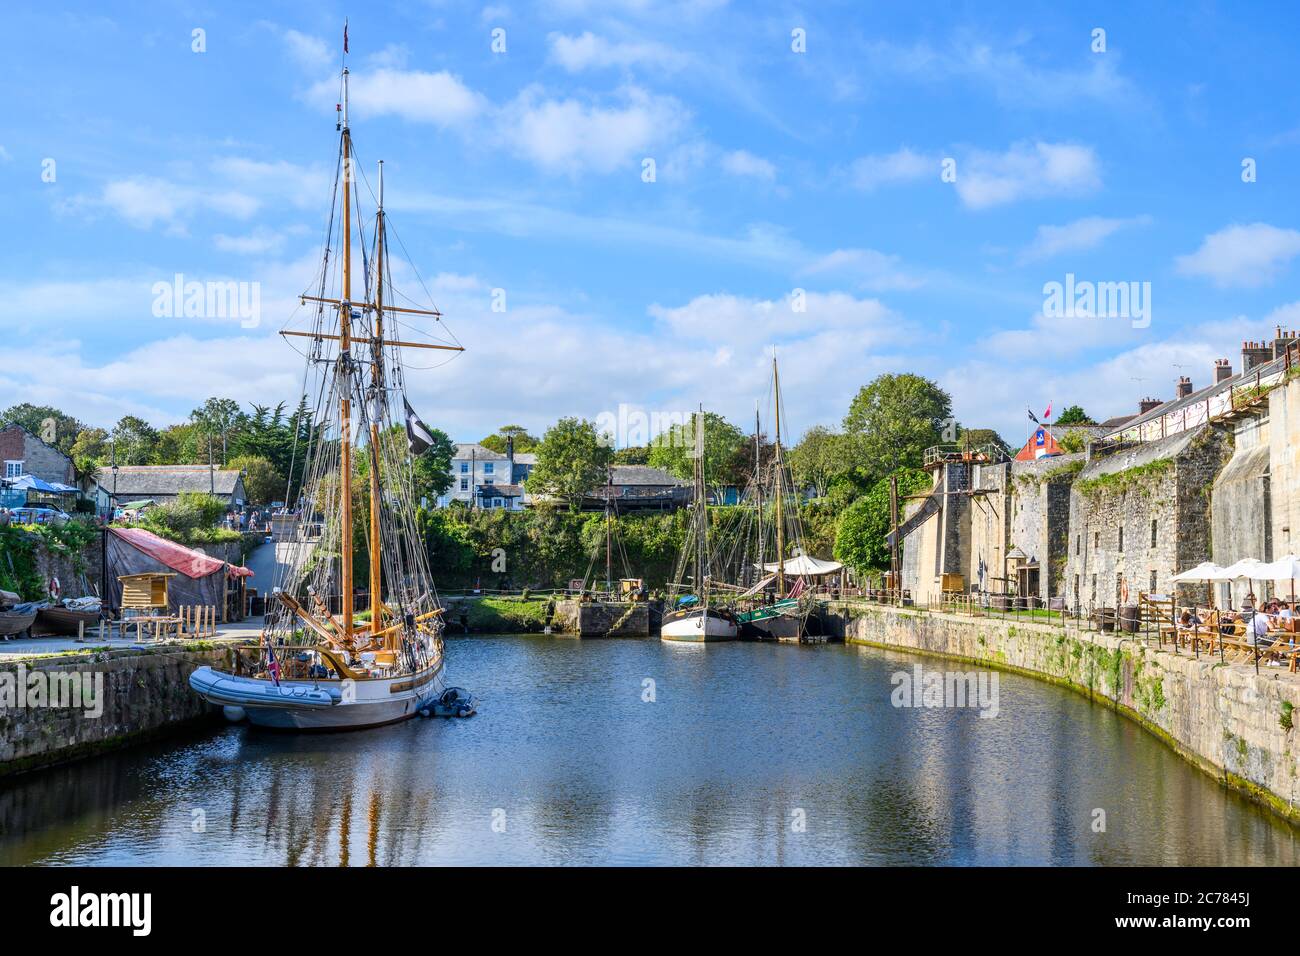 The topsail schooner tall ship 'Anny' was built in 1930 and is based in historic Charlestown Harbour, Cornwall, England, UK. Stock Photo